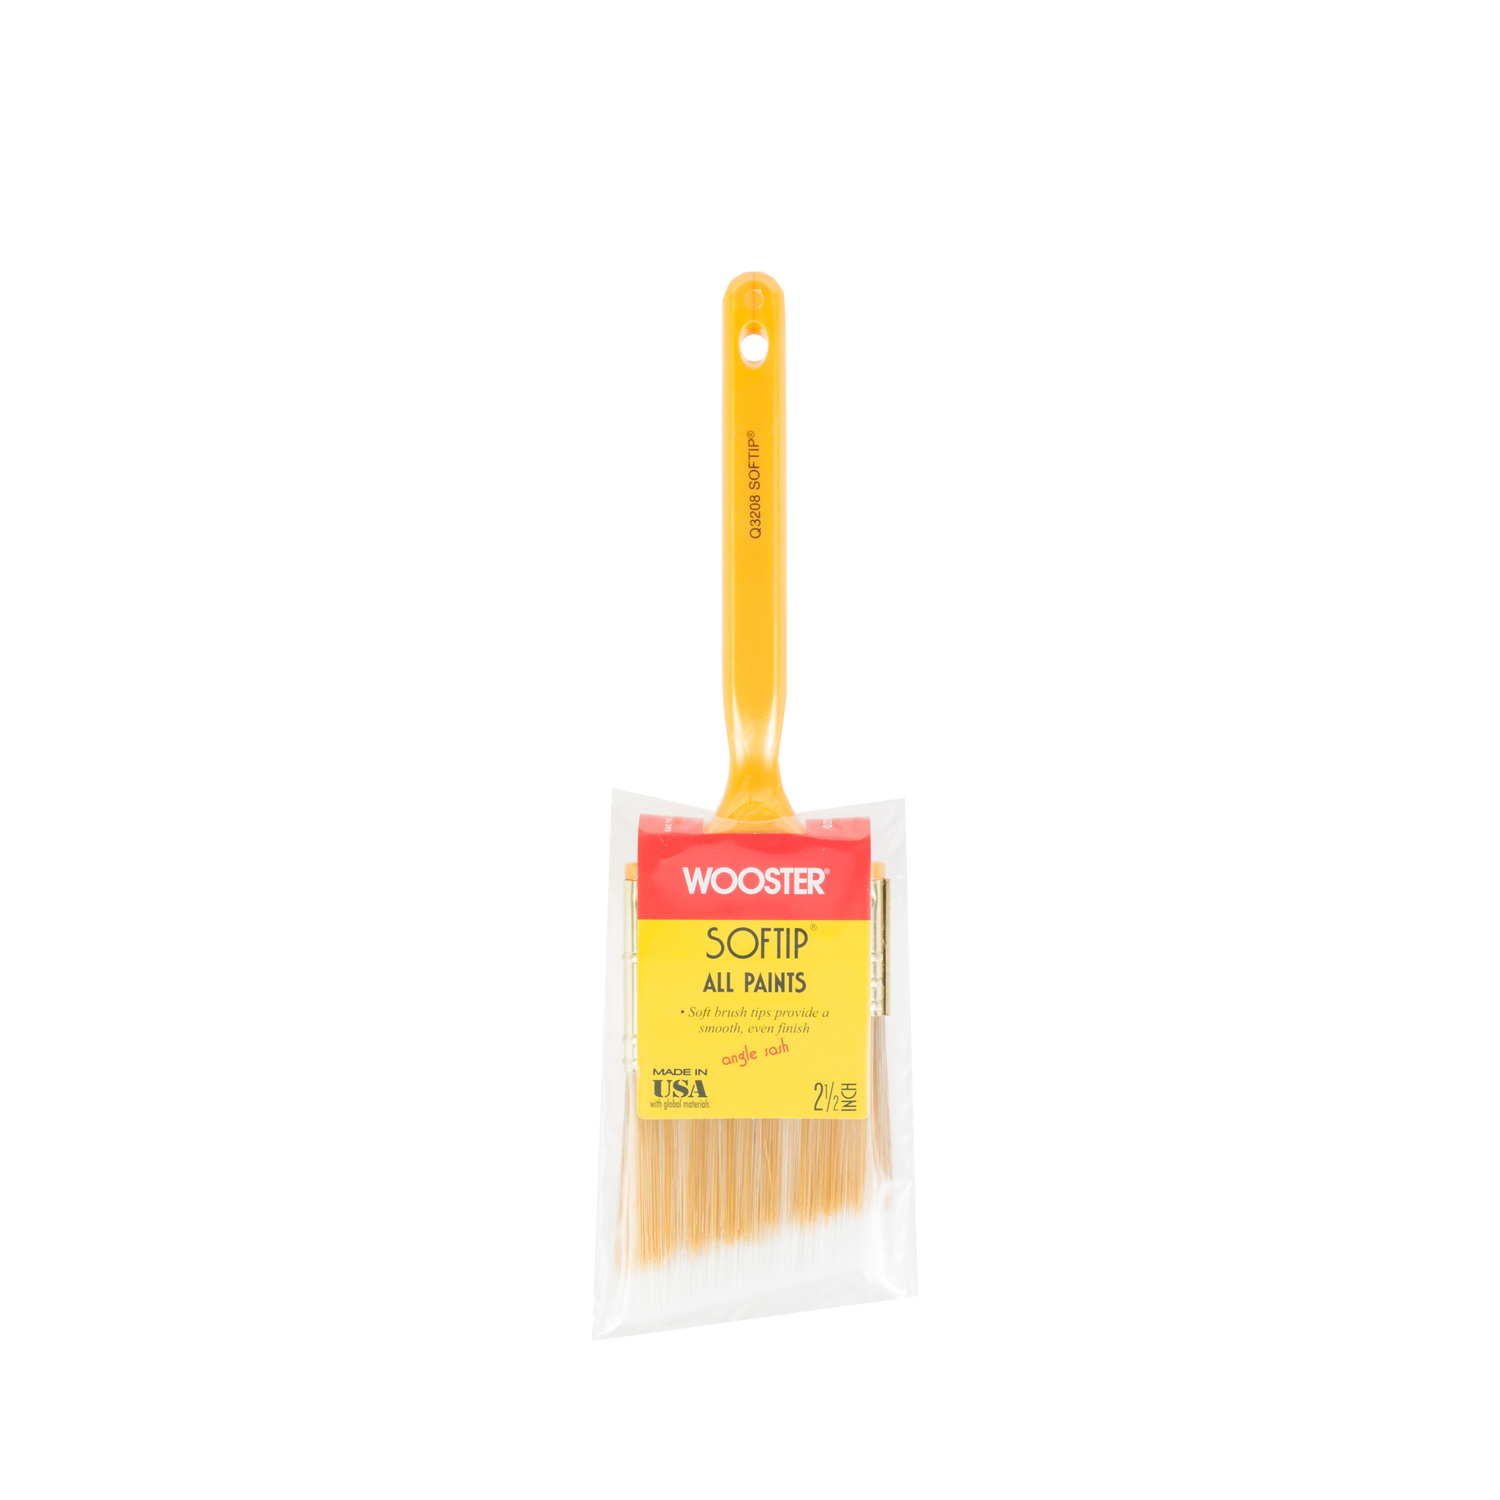 Photos - Putty Knife / Painting Tool Wooster Softip 2-1/2 in. Angle Trim Paint Brush Q3208-21/2